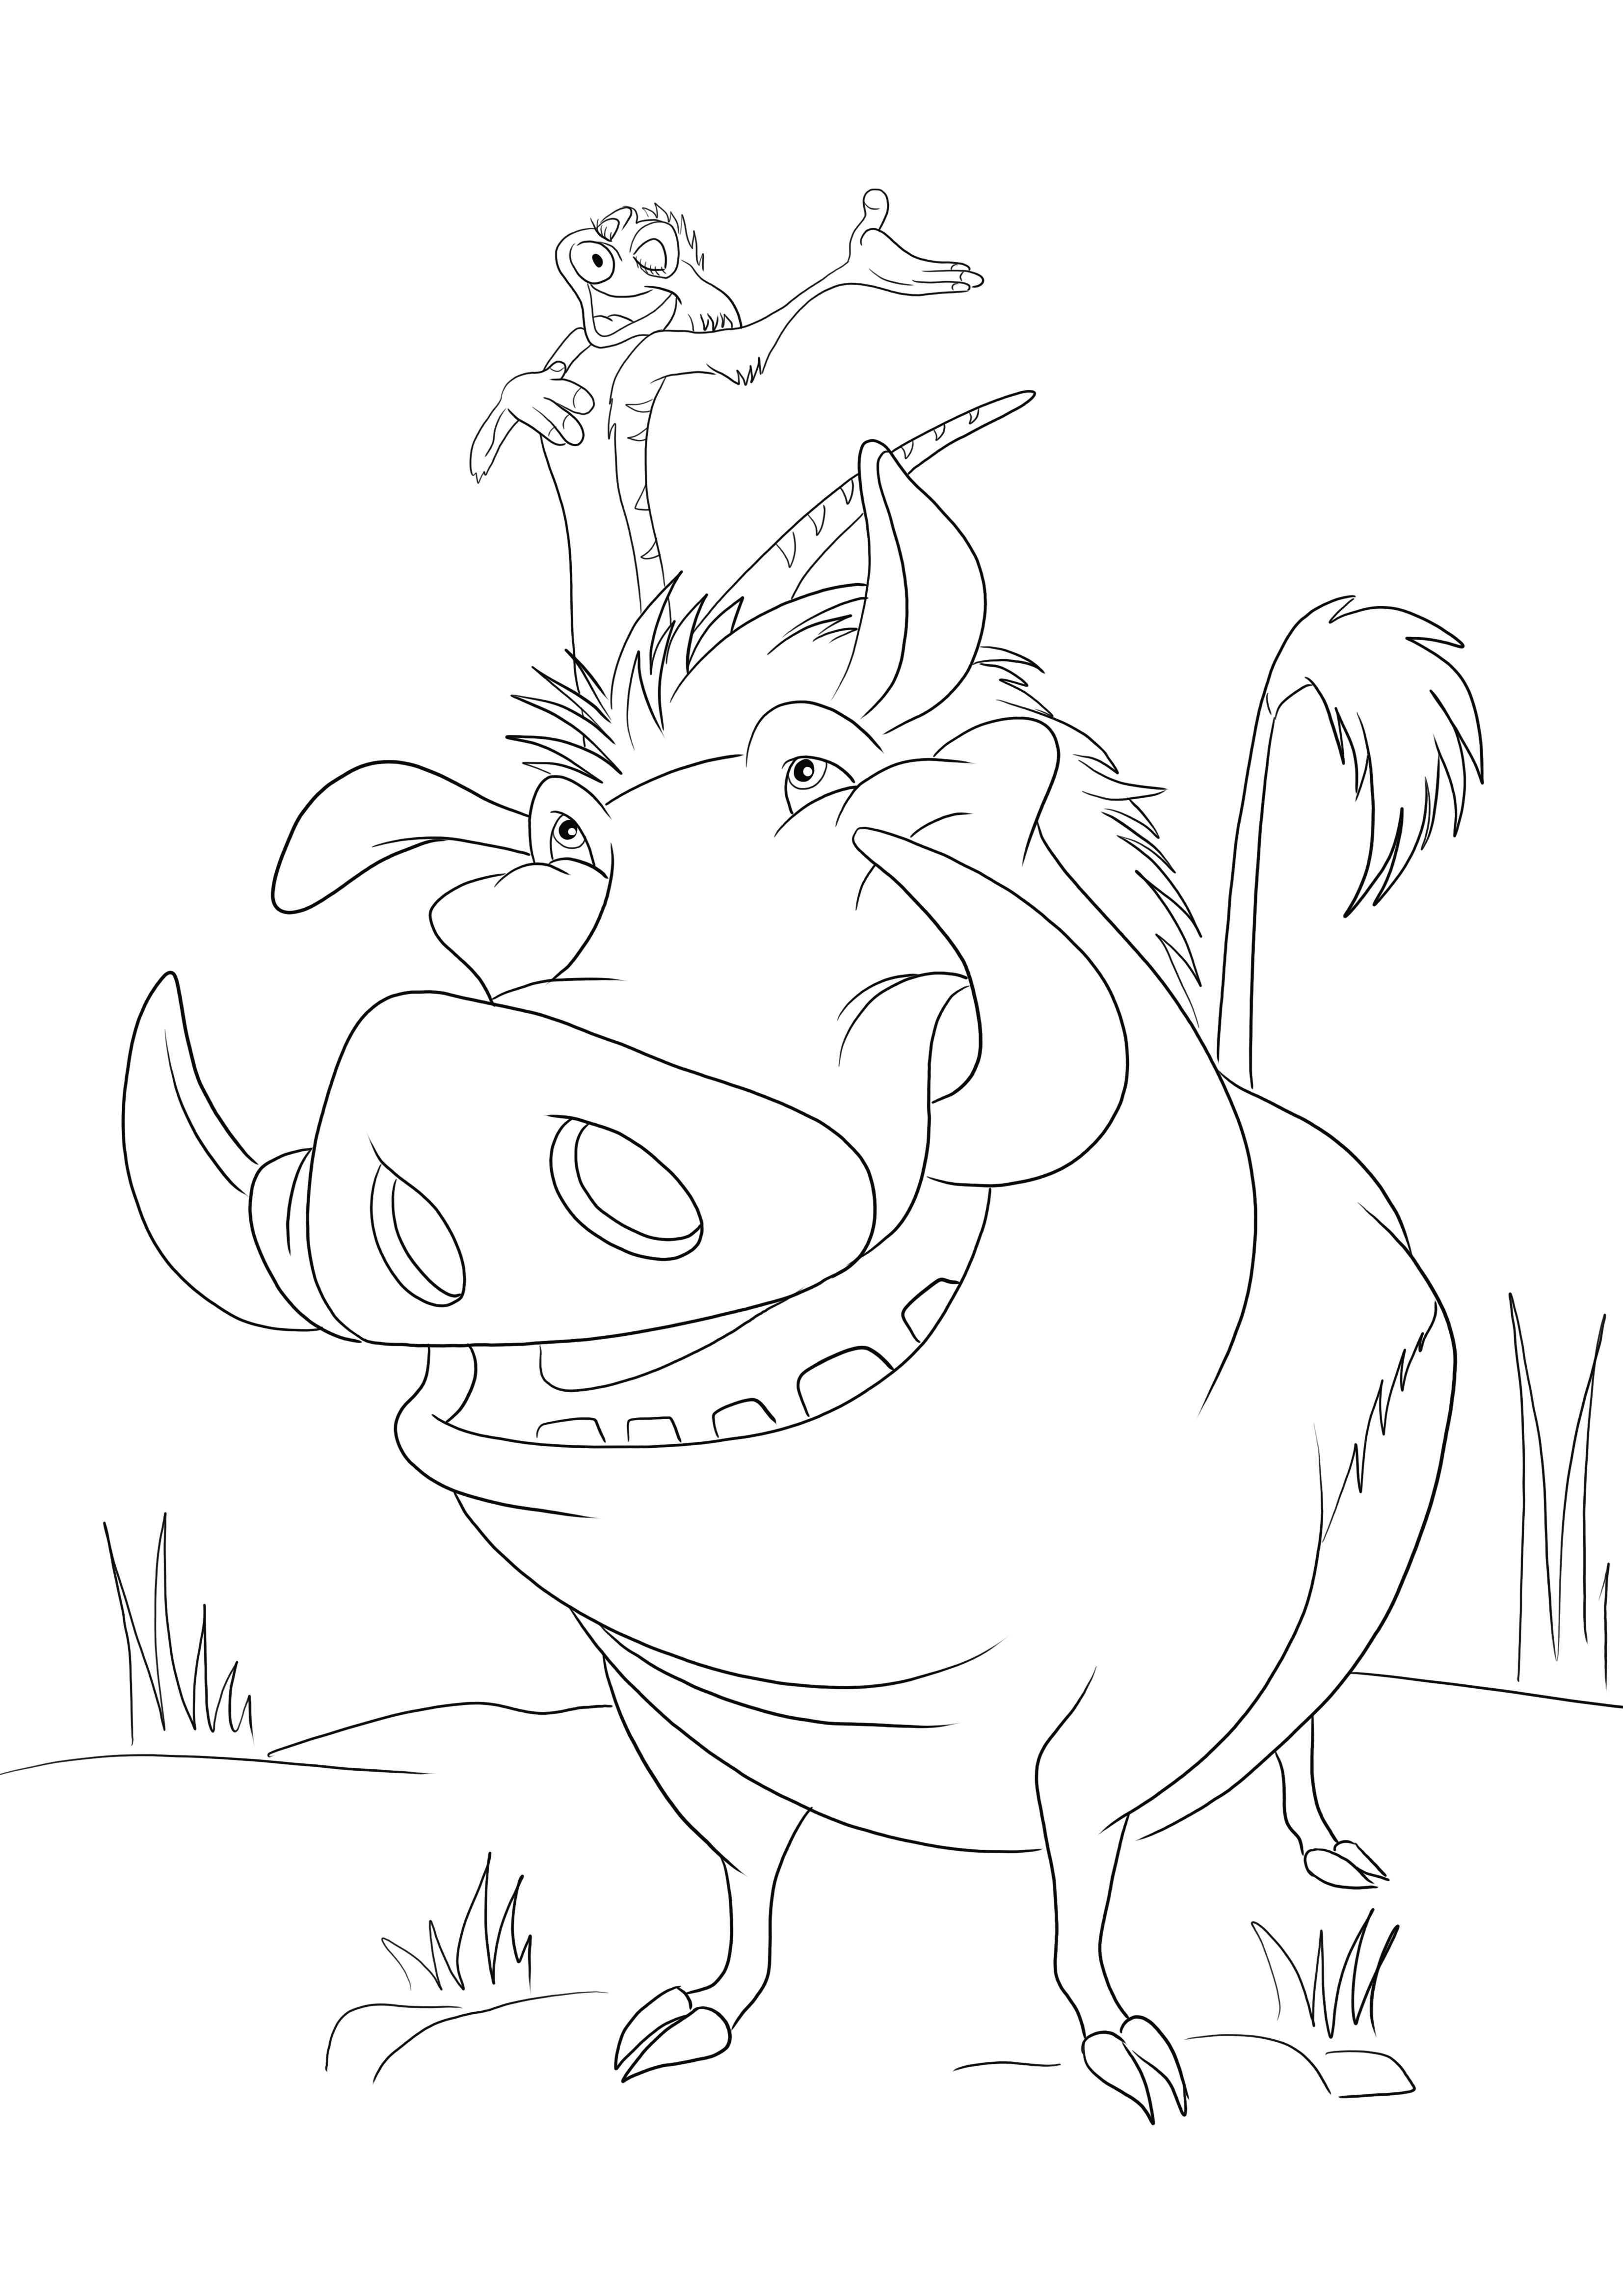 Timon and Pumbaa from Lion's king cartoon free printable for easy coloring